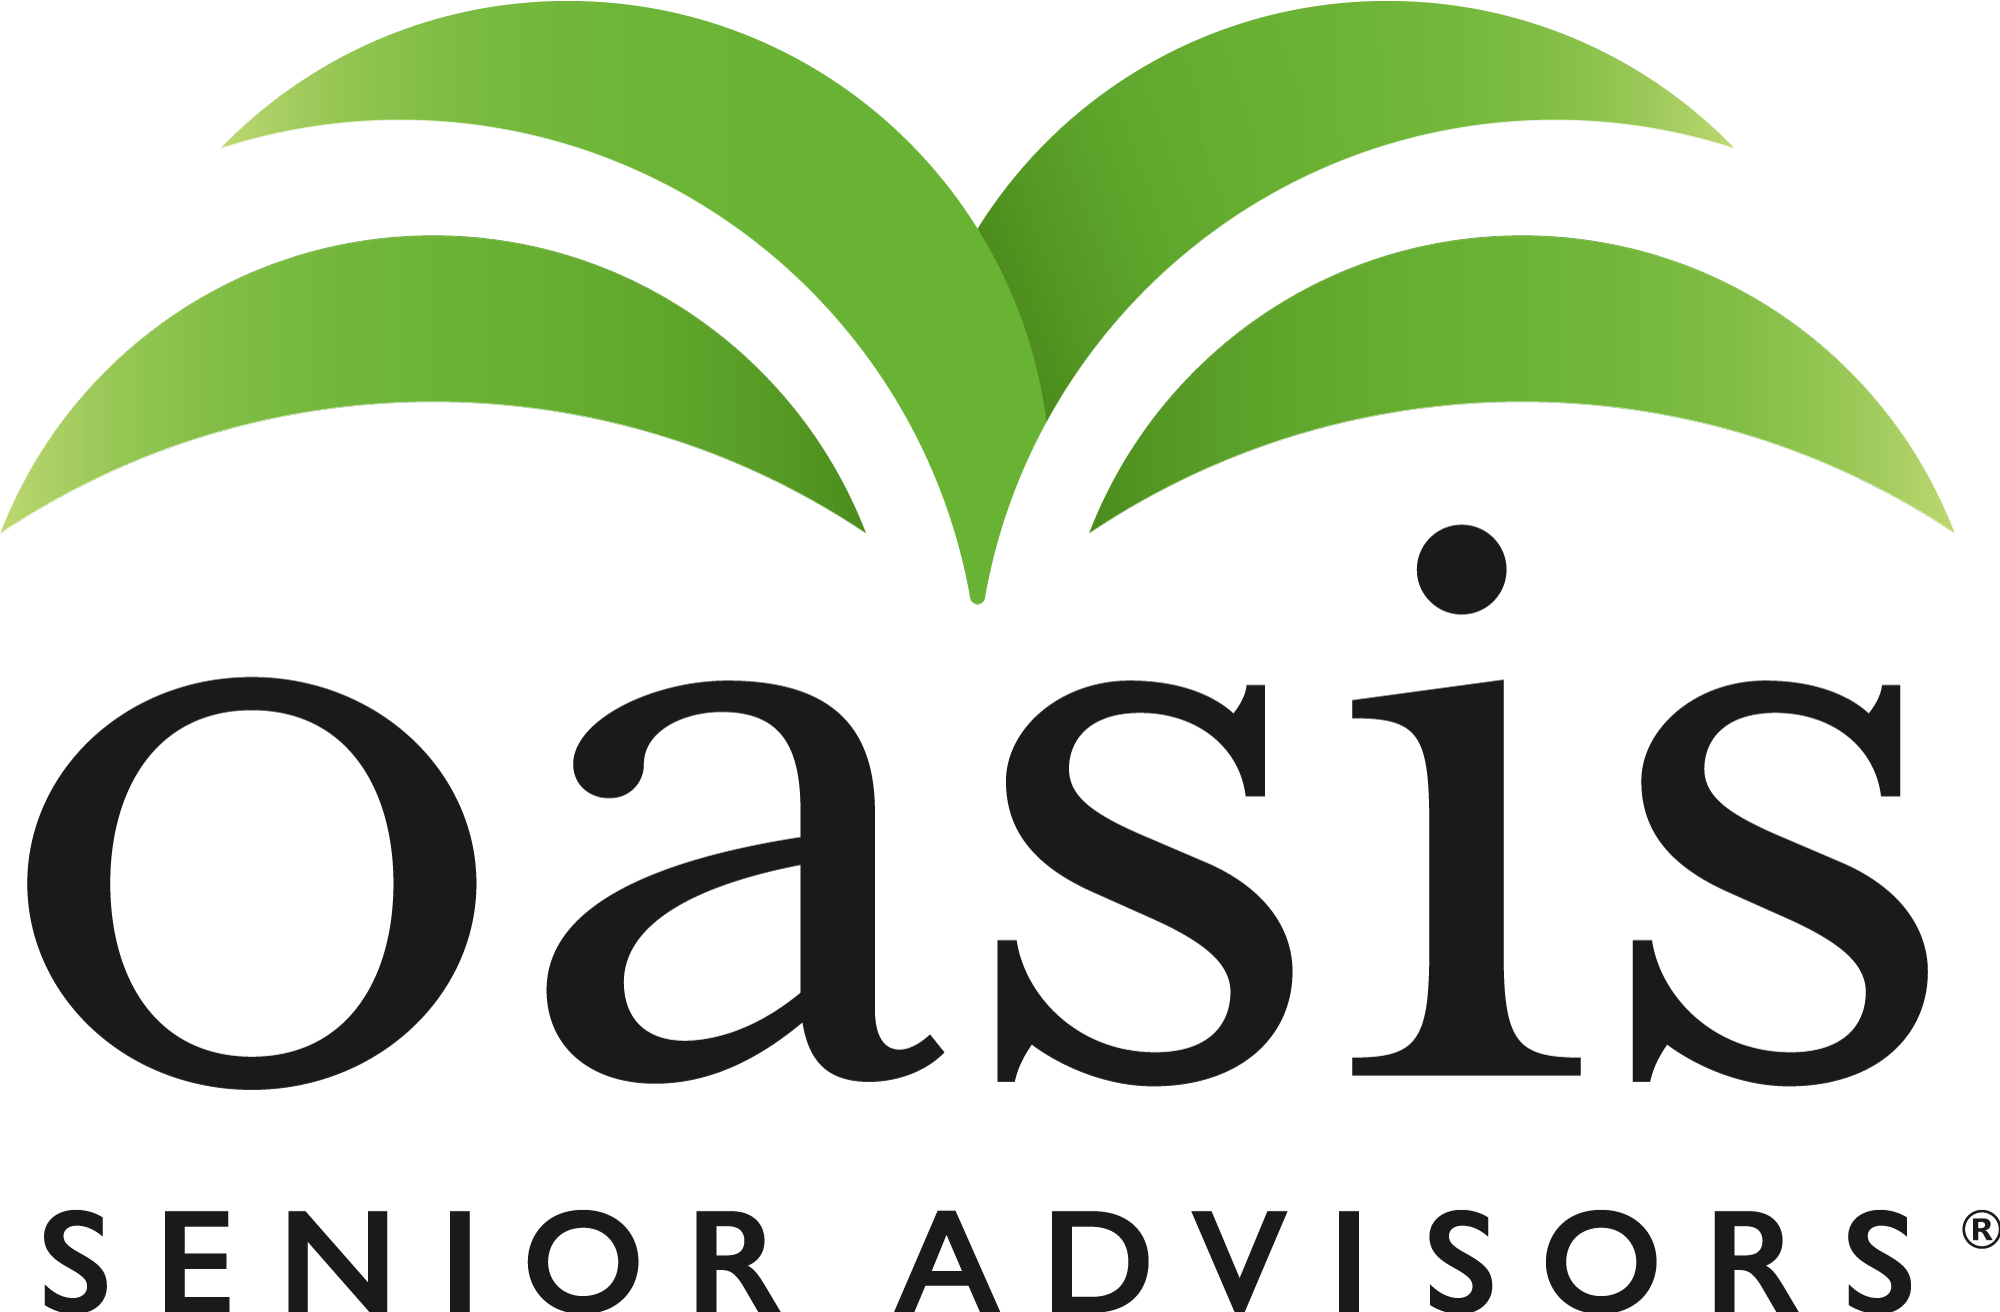 New franchisees provide personal service from Oasis Senior Advisors